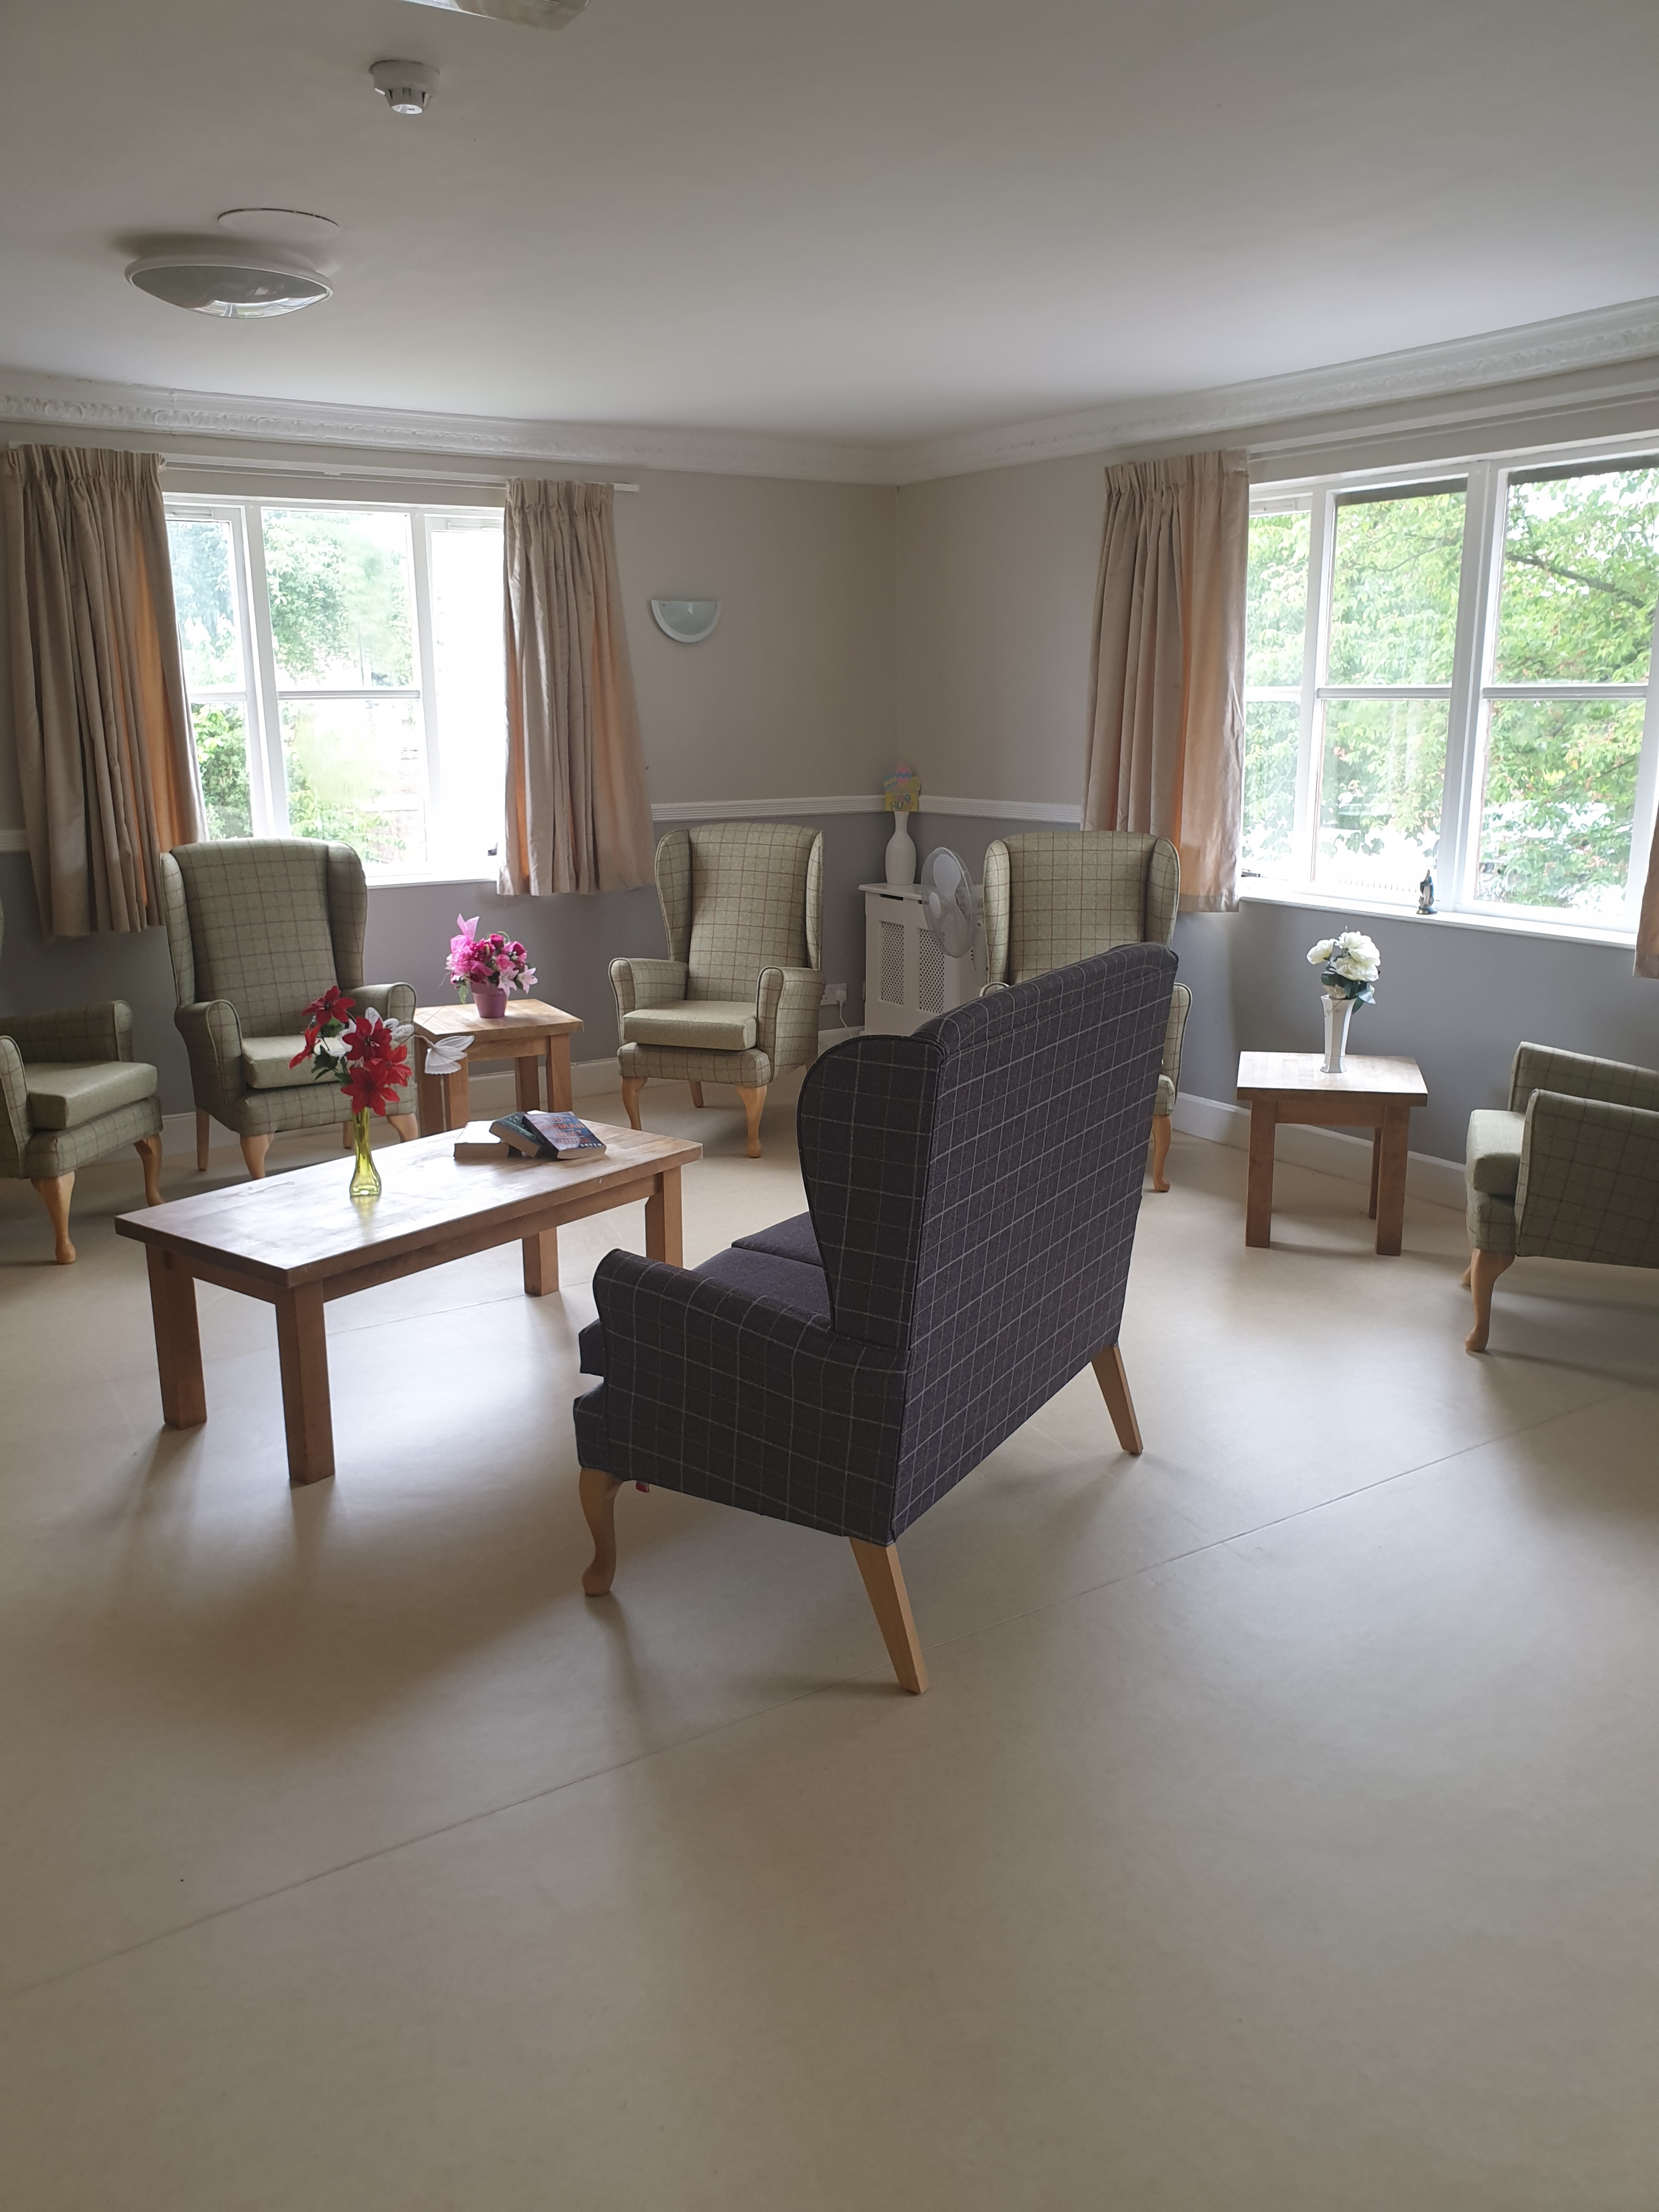 Lounge May 19 EC: Key Healthcare is dedicated to caring for elderly residents in safe. We have multiple dementia care homes including our care home middlesbrough, our care home St. Helen and care home saltburn. We excel in monitoring and improving care levels.